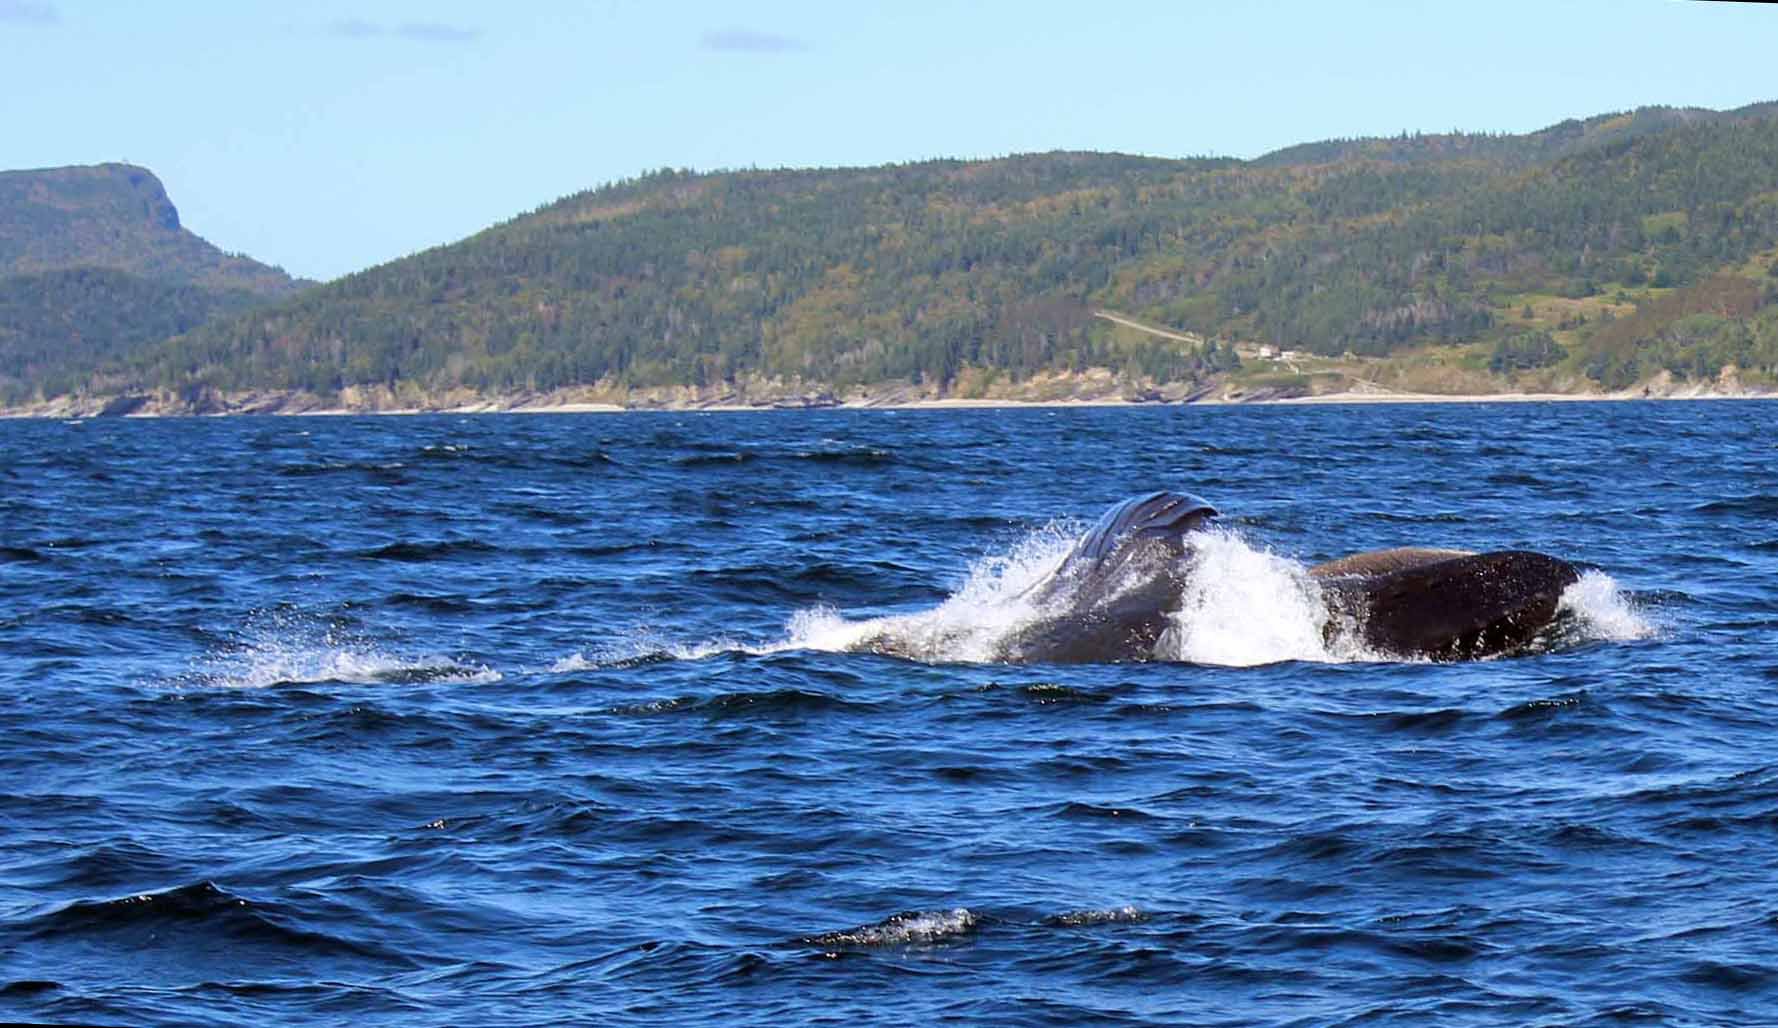 Humpback whale feeding on surface Baie de Gaspe, Quebec with Appalachians in background